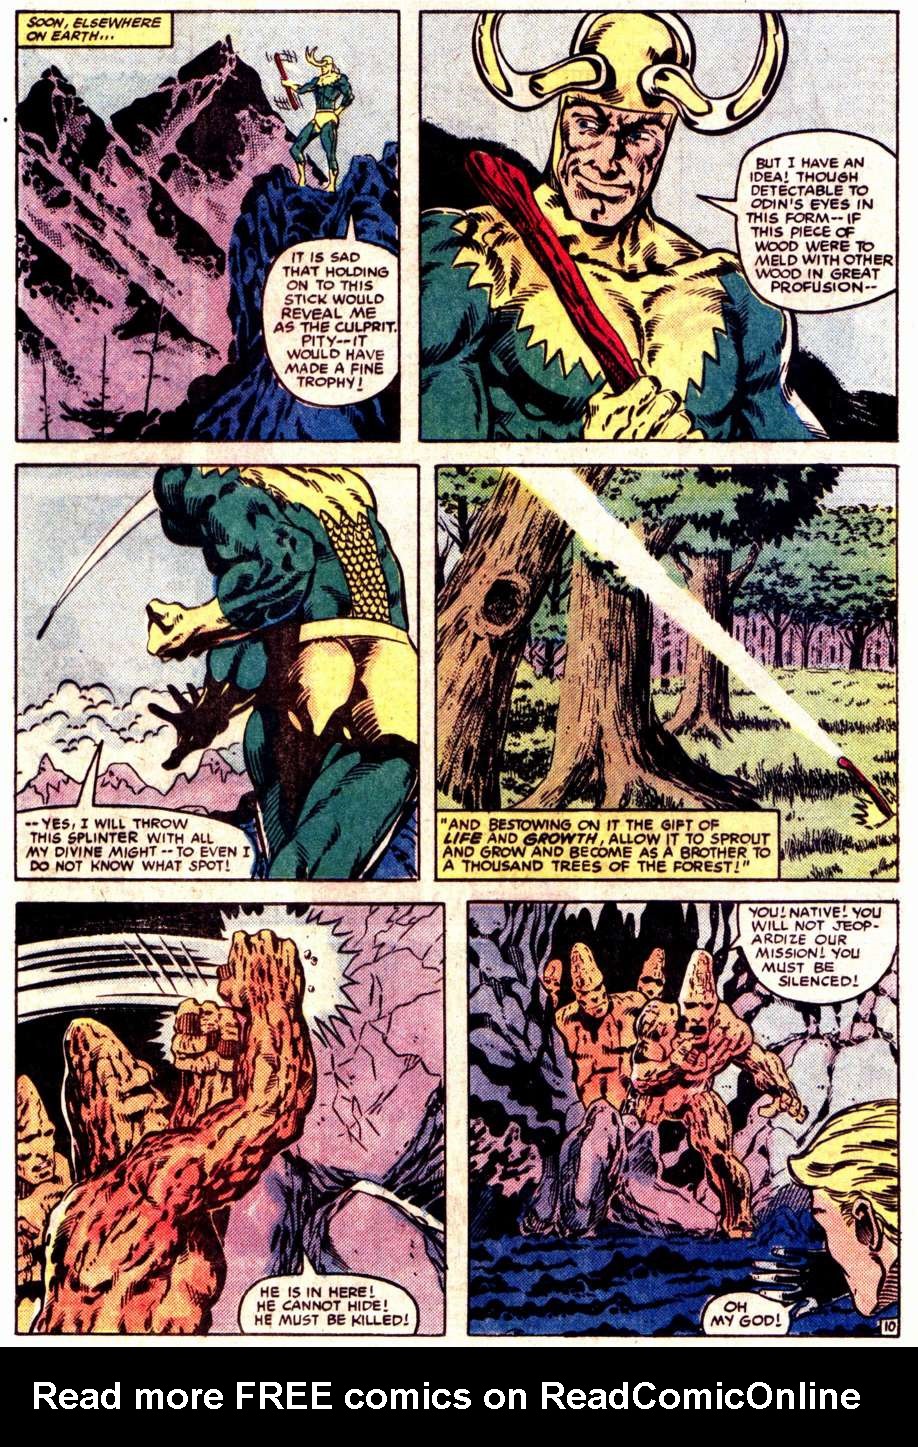 What If? (1977) issue 47 - Loki had found The hammer of Thor - Page 11